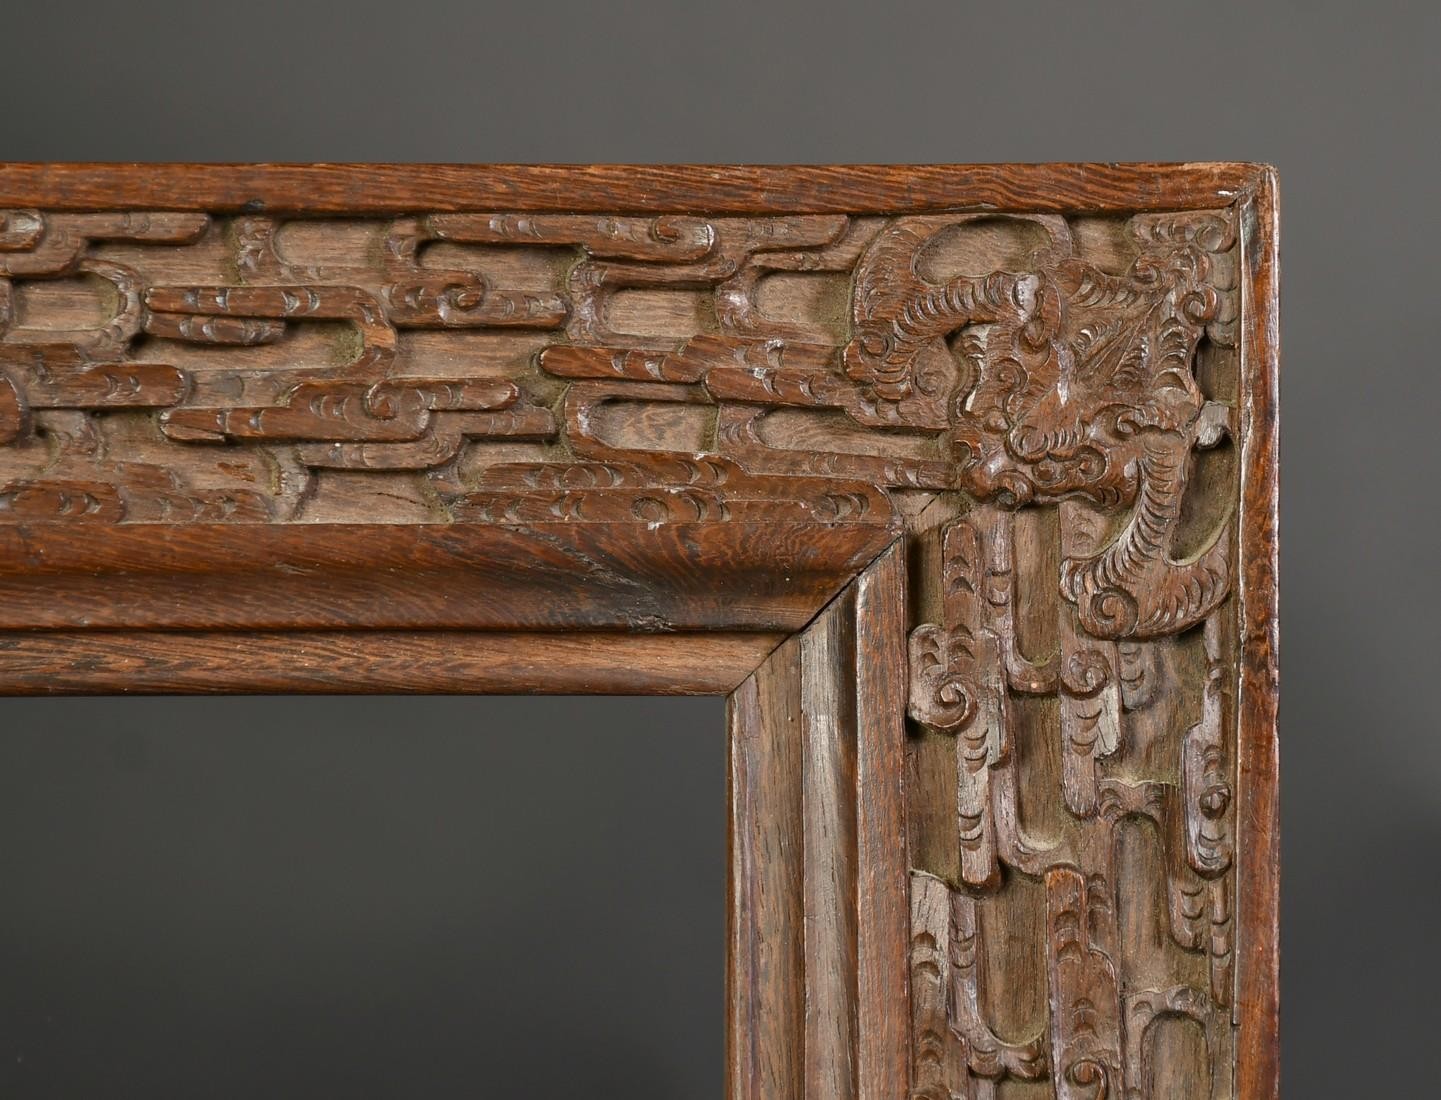 AN EARLY 20TH CENTURY CHINESE HARDWOOD FRAME, carved in an intricate design with bats and dragons, - Image 4 of 4